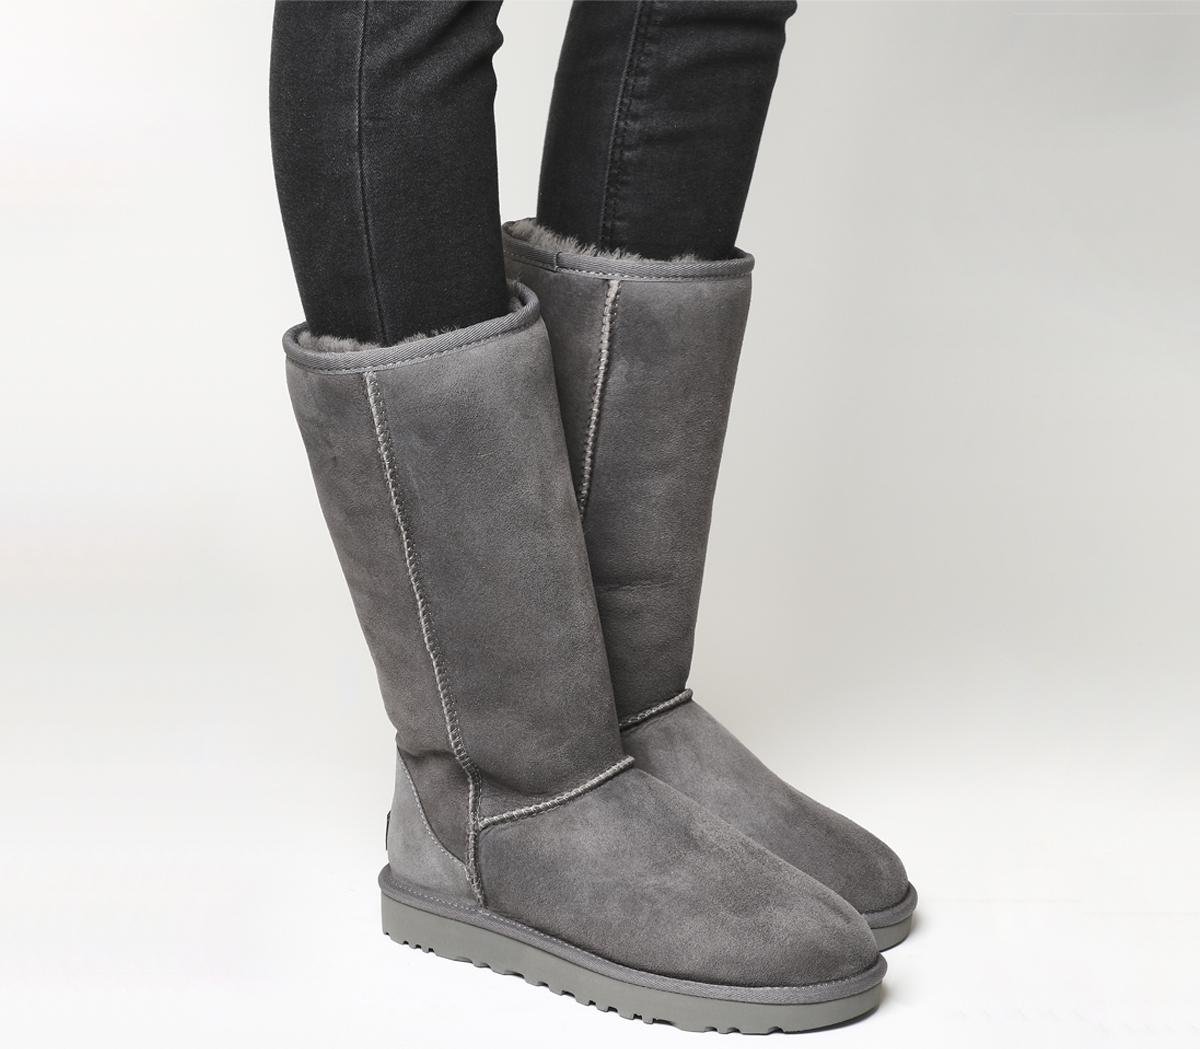 classic tall grey ugg boots